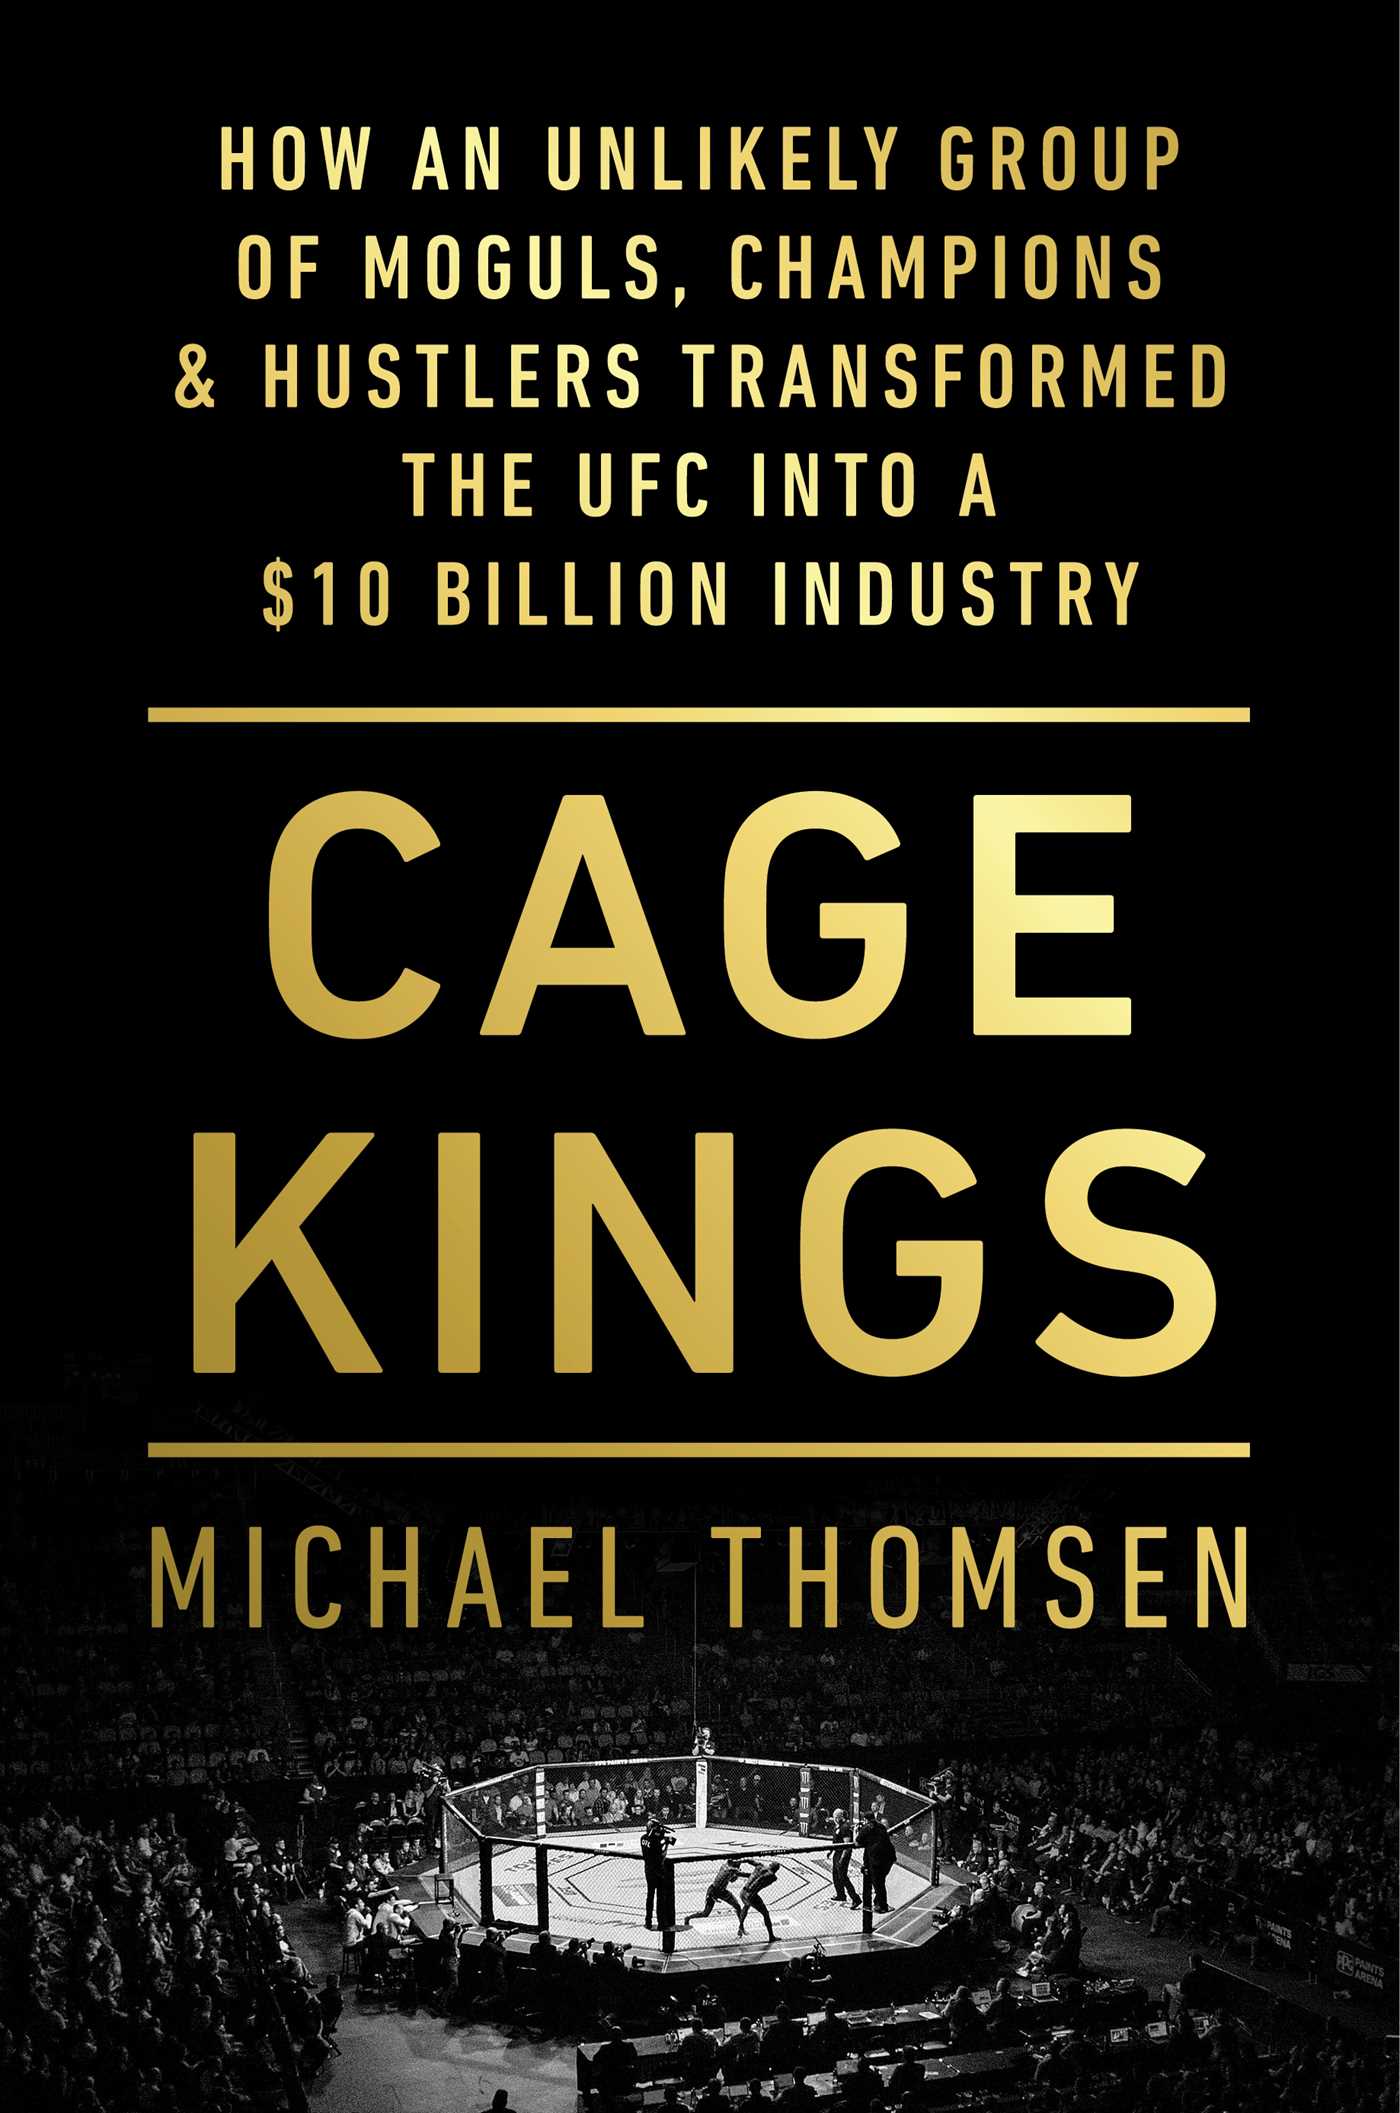 The cover of Cage Kings: How an Unlikely Group of Moguls, Champions &#038; Hustlers Transformed the UFC into a $10 Billion Industry